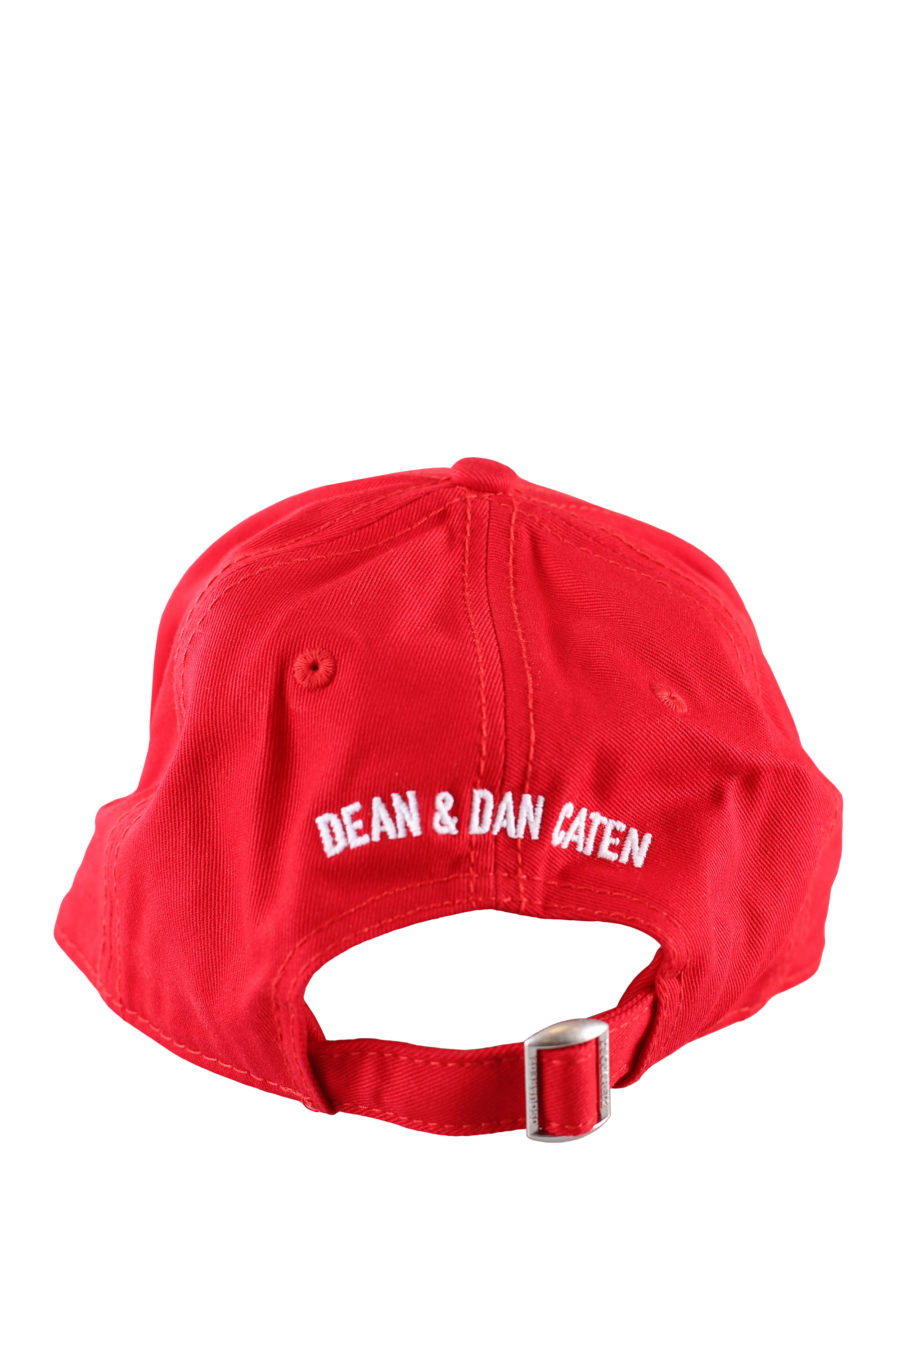 Adjustable red cap with white "icon" logo - IMG 0063